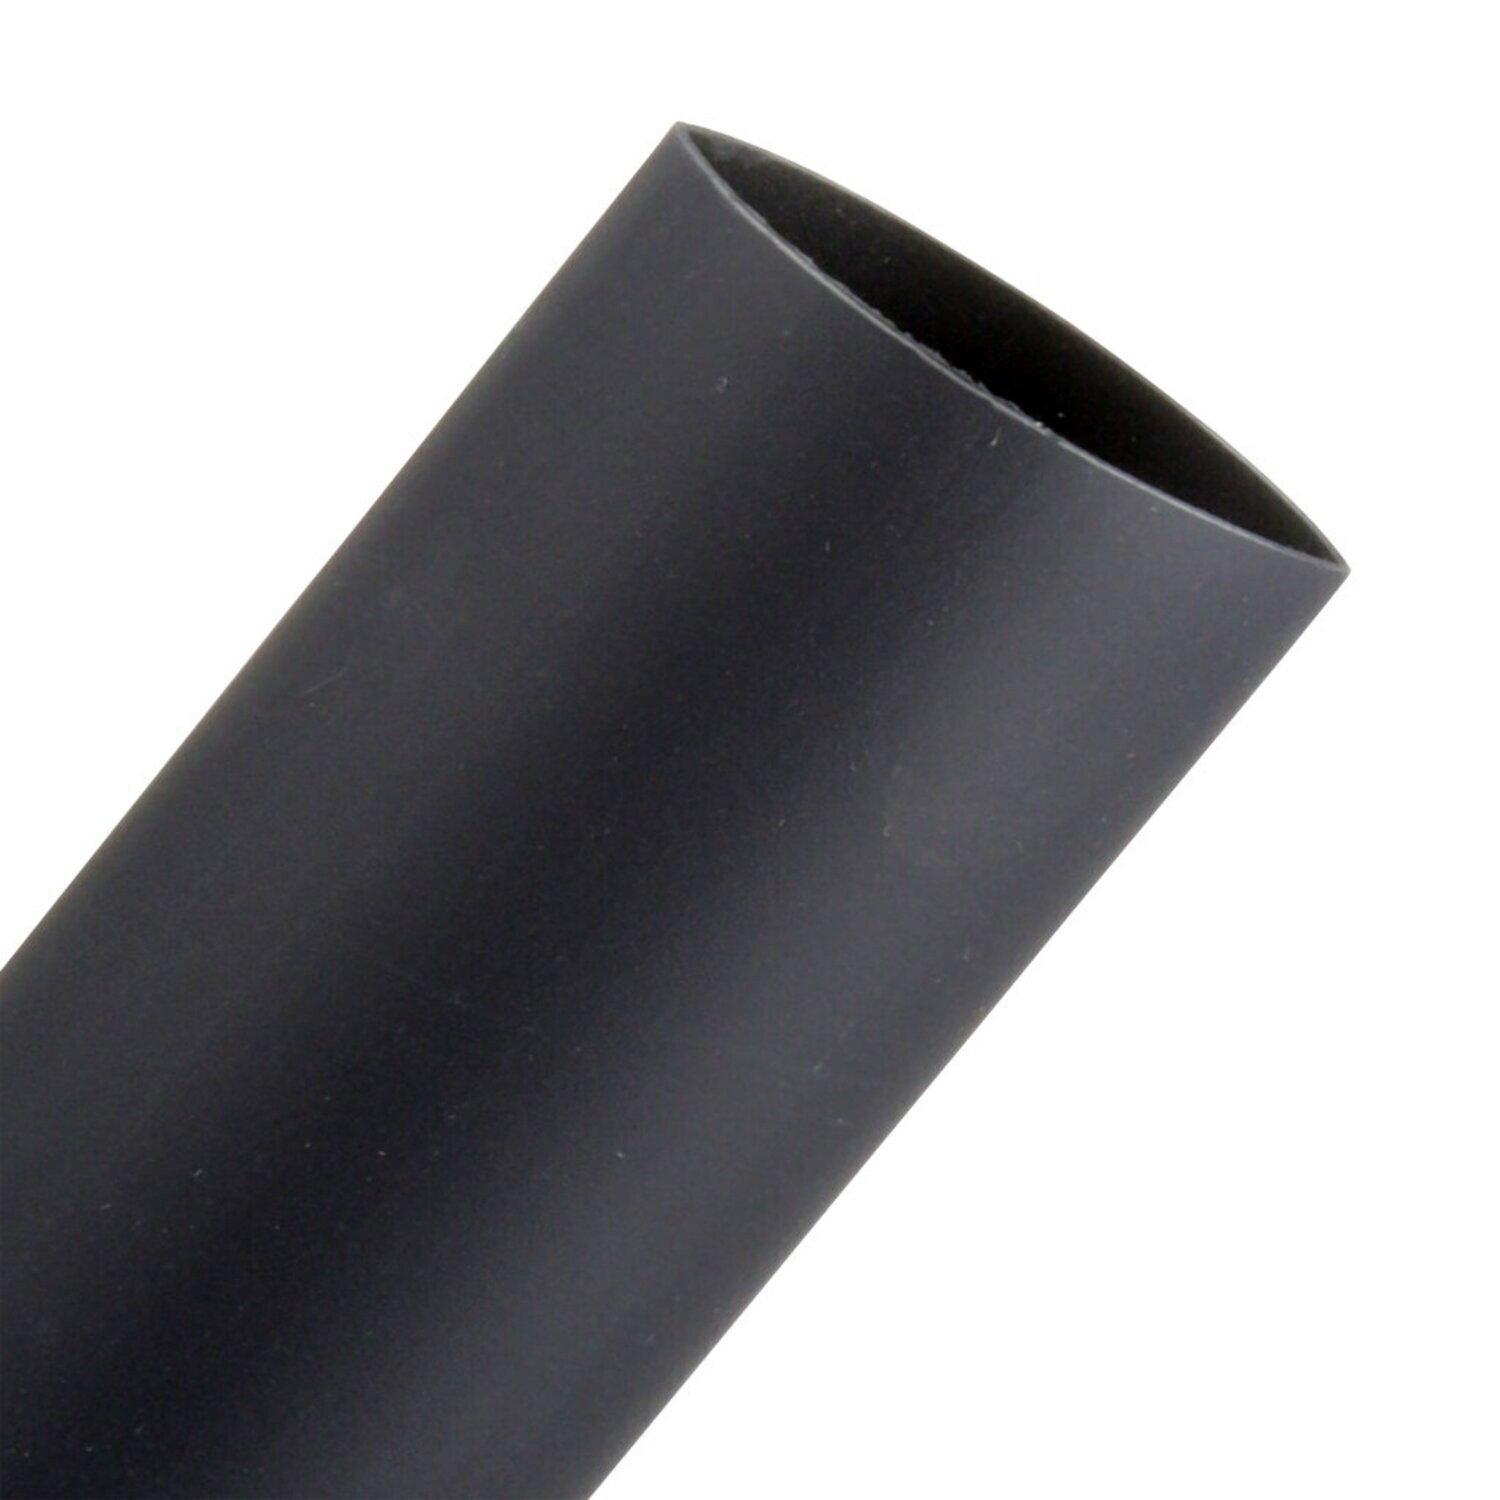 7000133691 - 3M Heat Shrink Thin-Wall Tubing FP-301-1-6"-Black-10-10 Pc Pks, 6 in
Length pieces, 10 pieces/pack, 10 packs/case